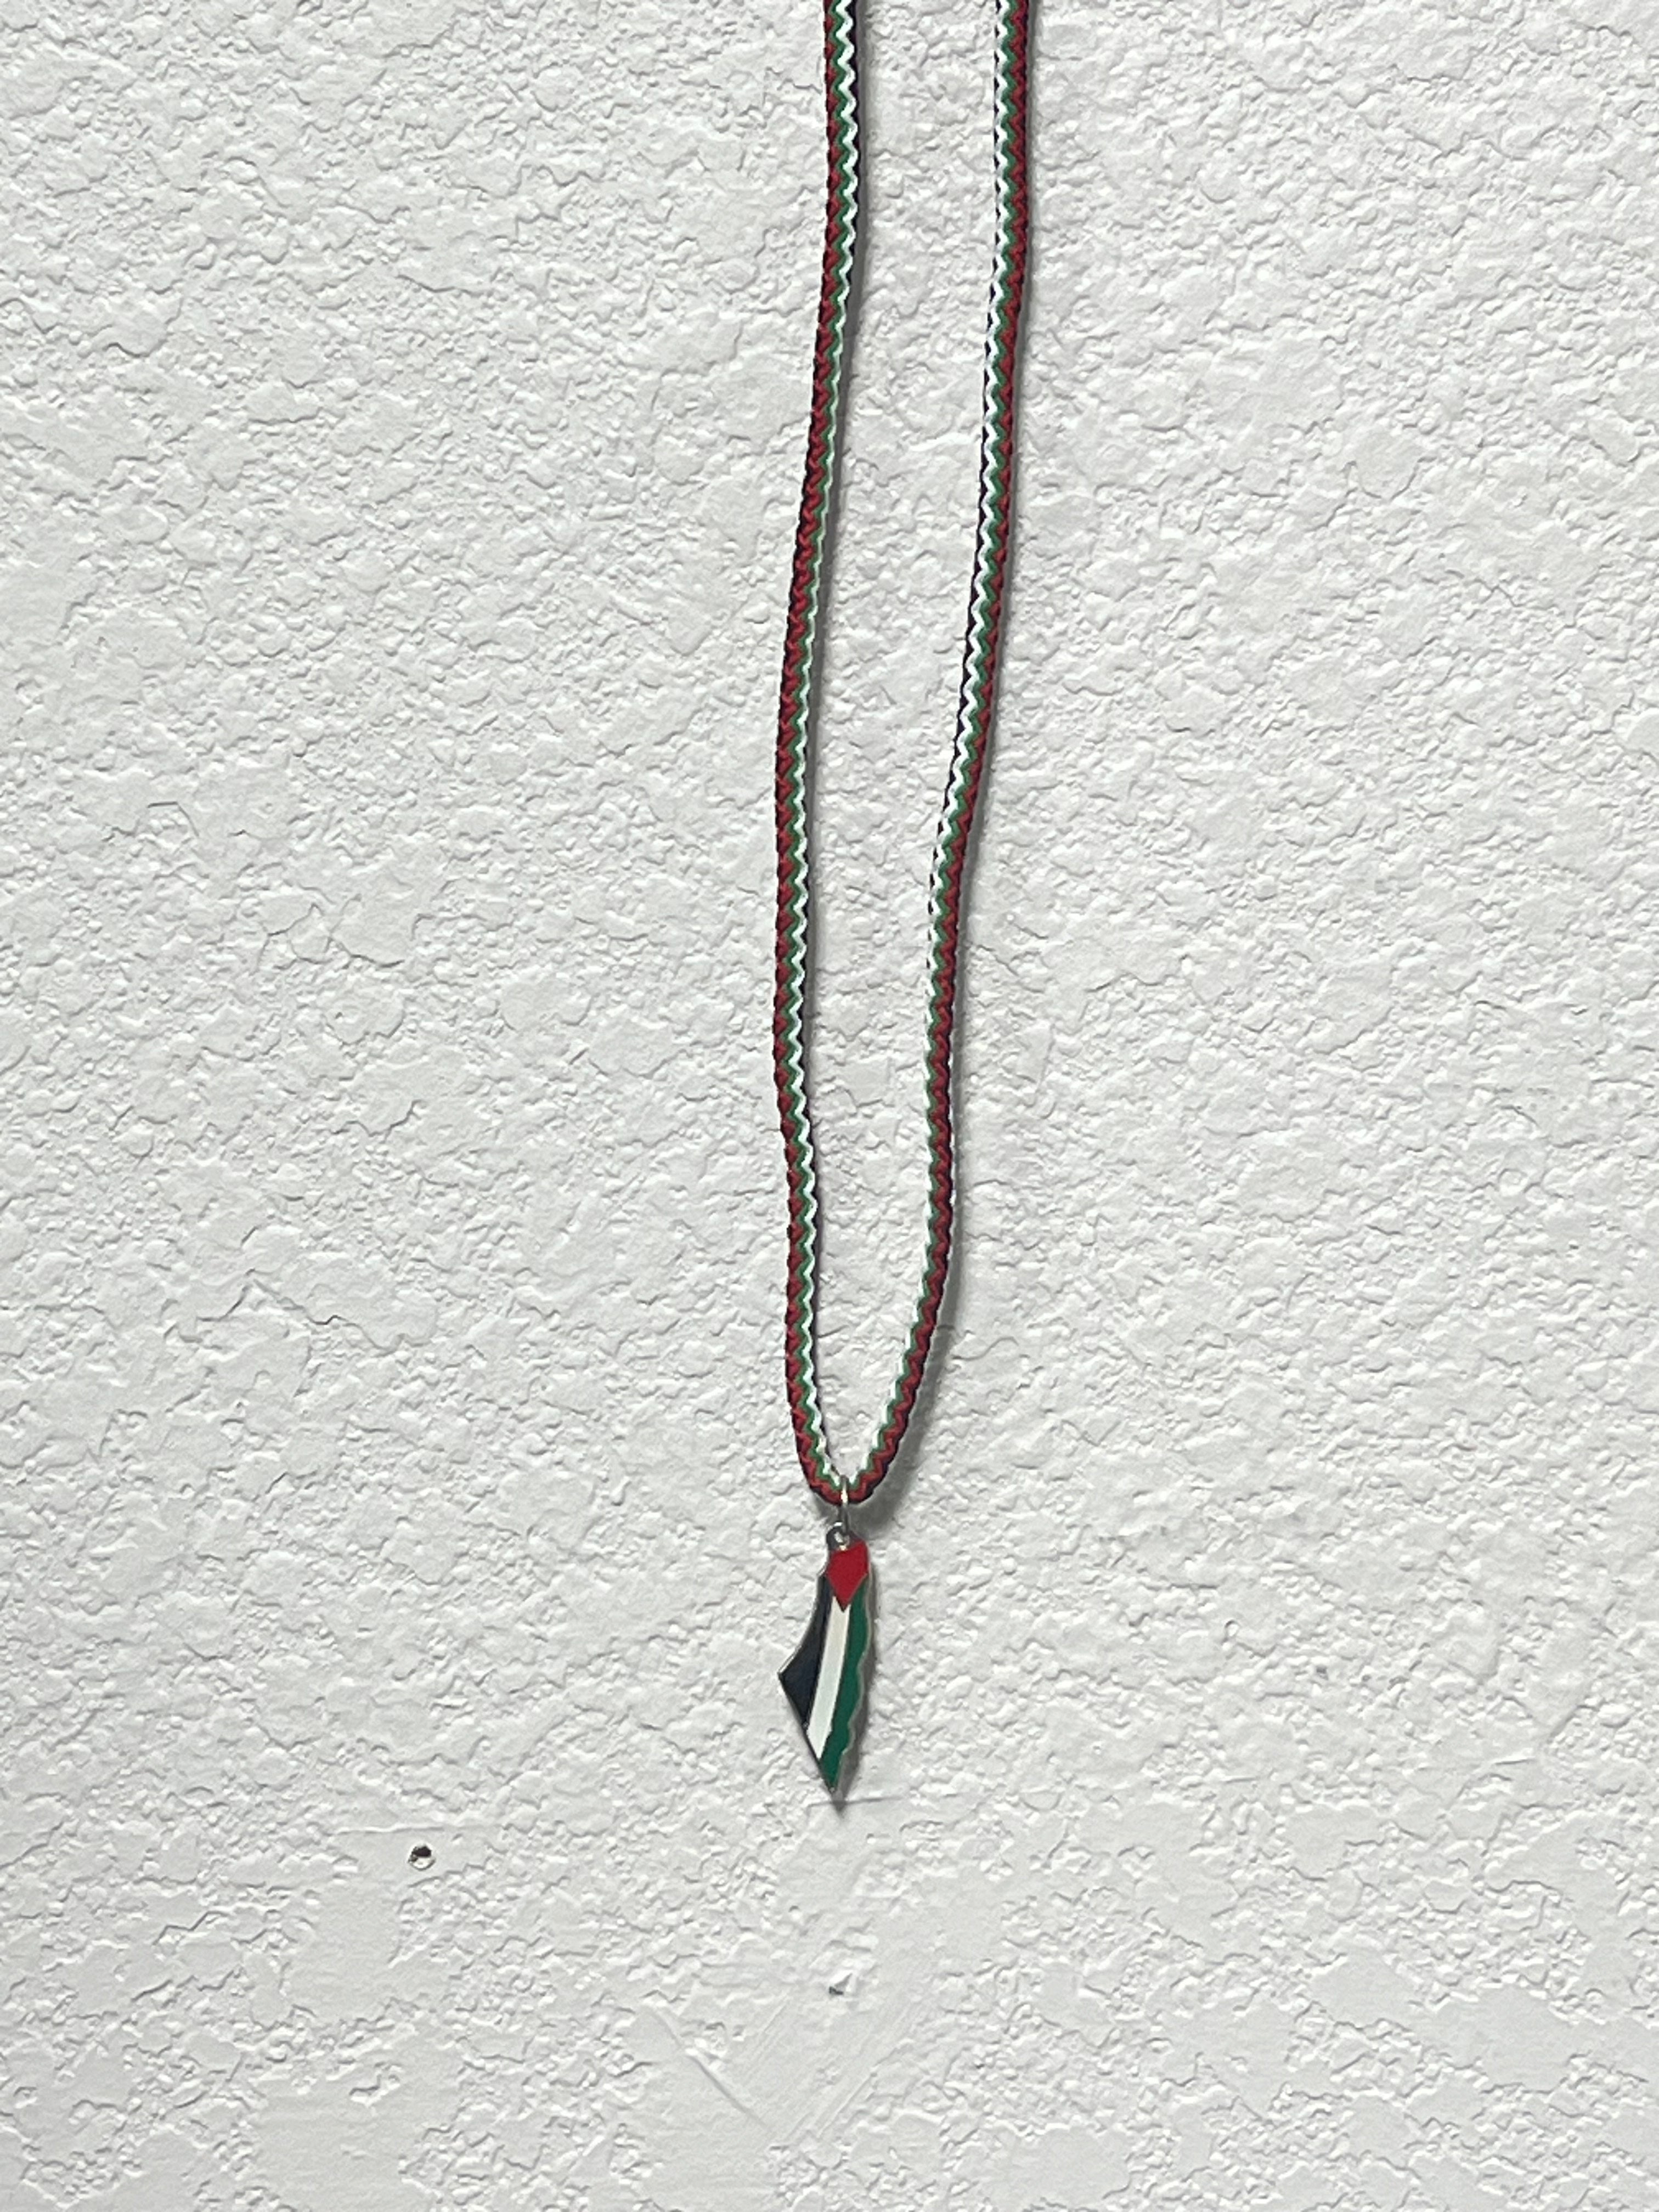 Necklaces made in Palestine handmade colorful